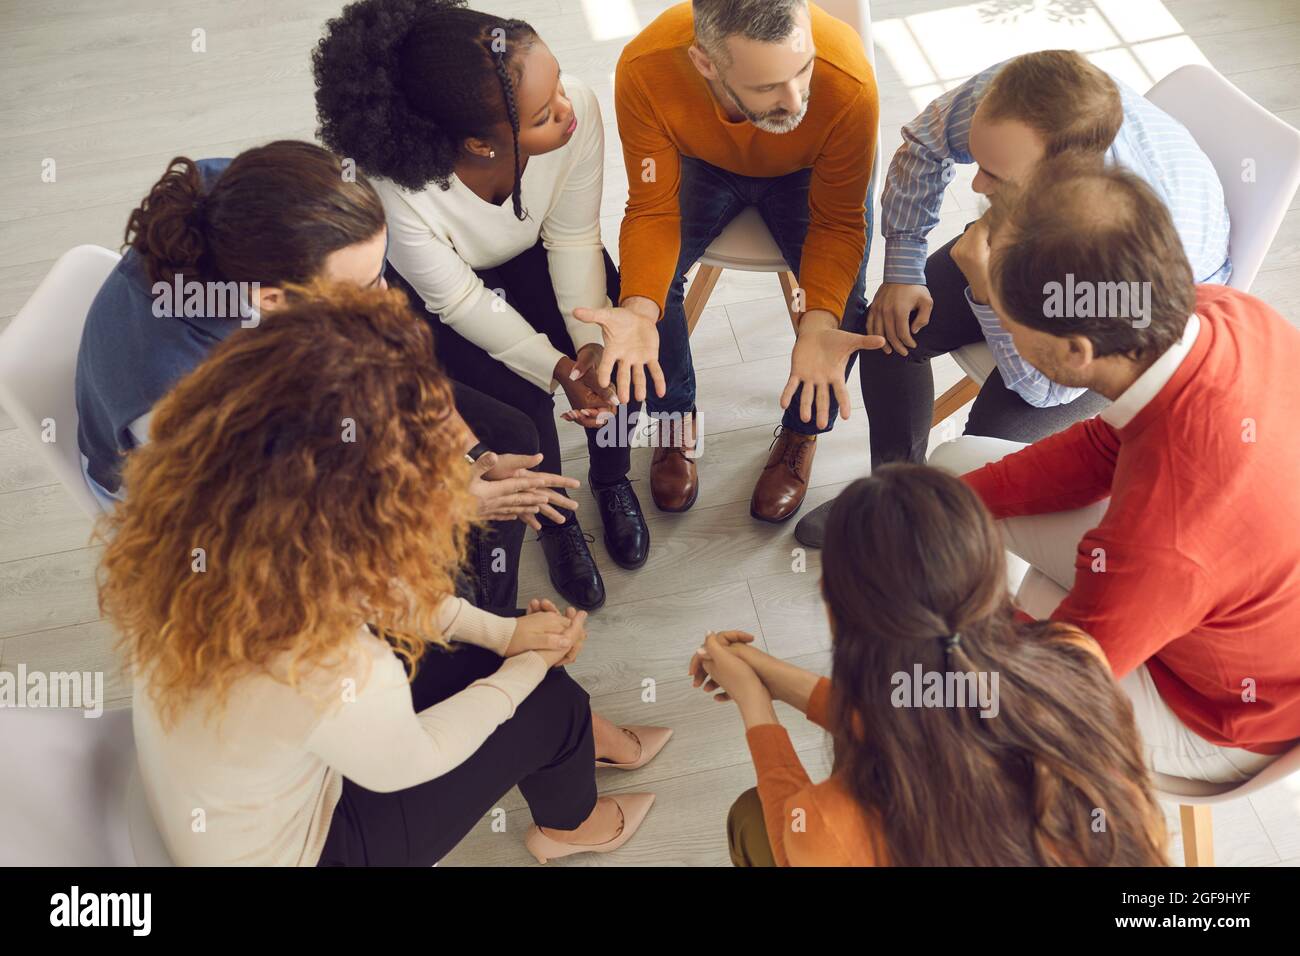 High angle shot of diverse people working on their problems in group therapy session Stock Photo